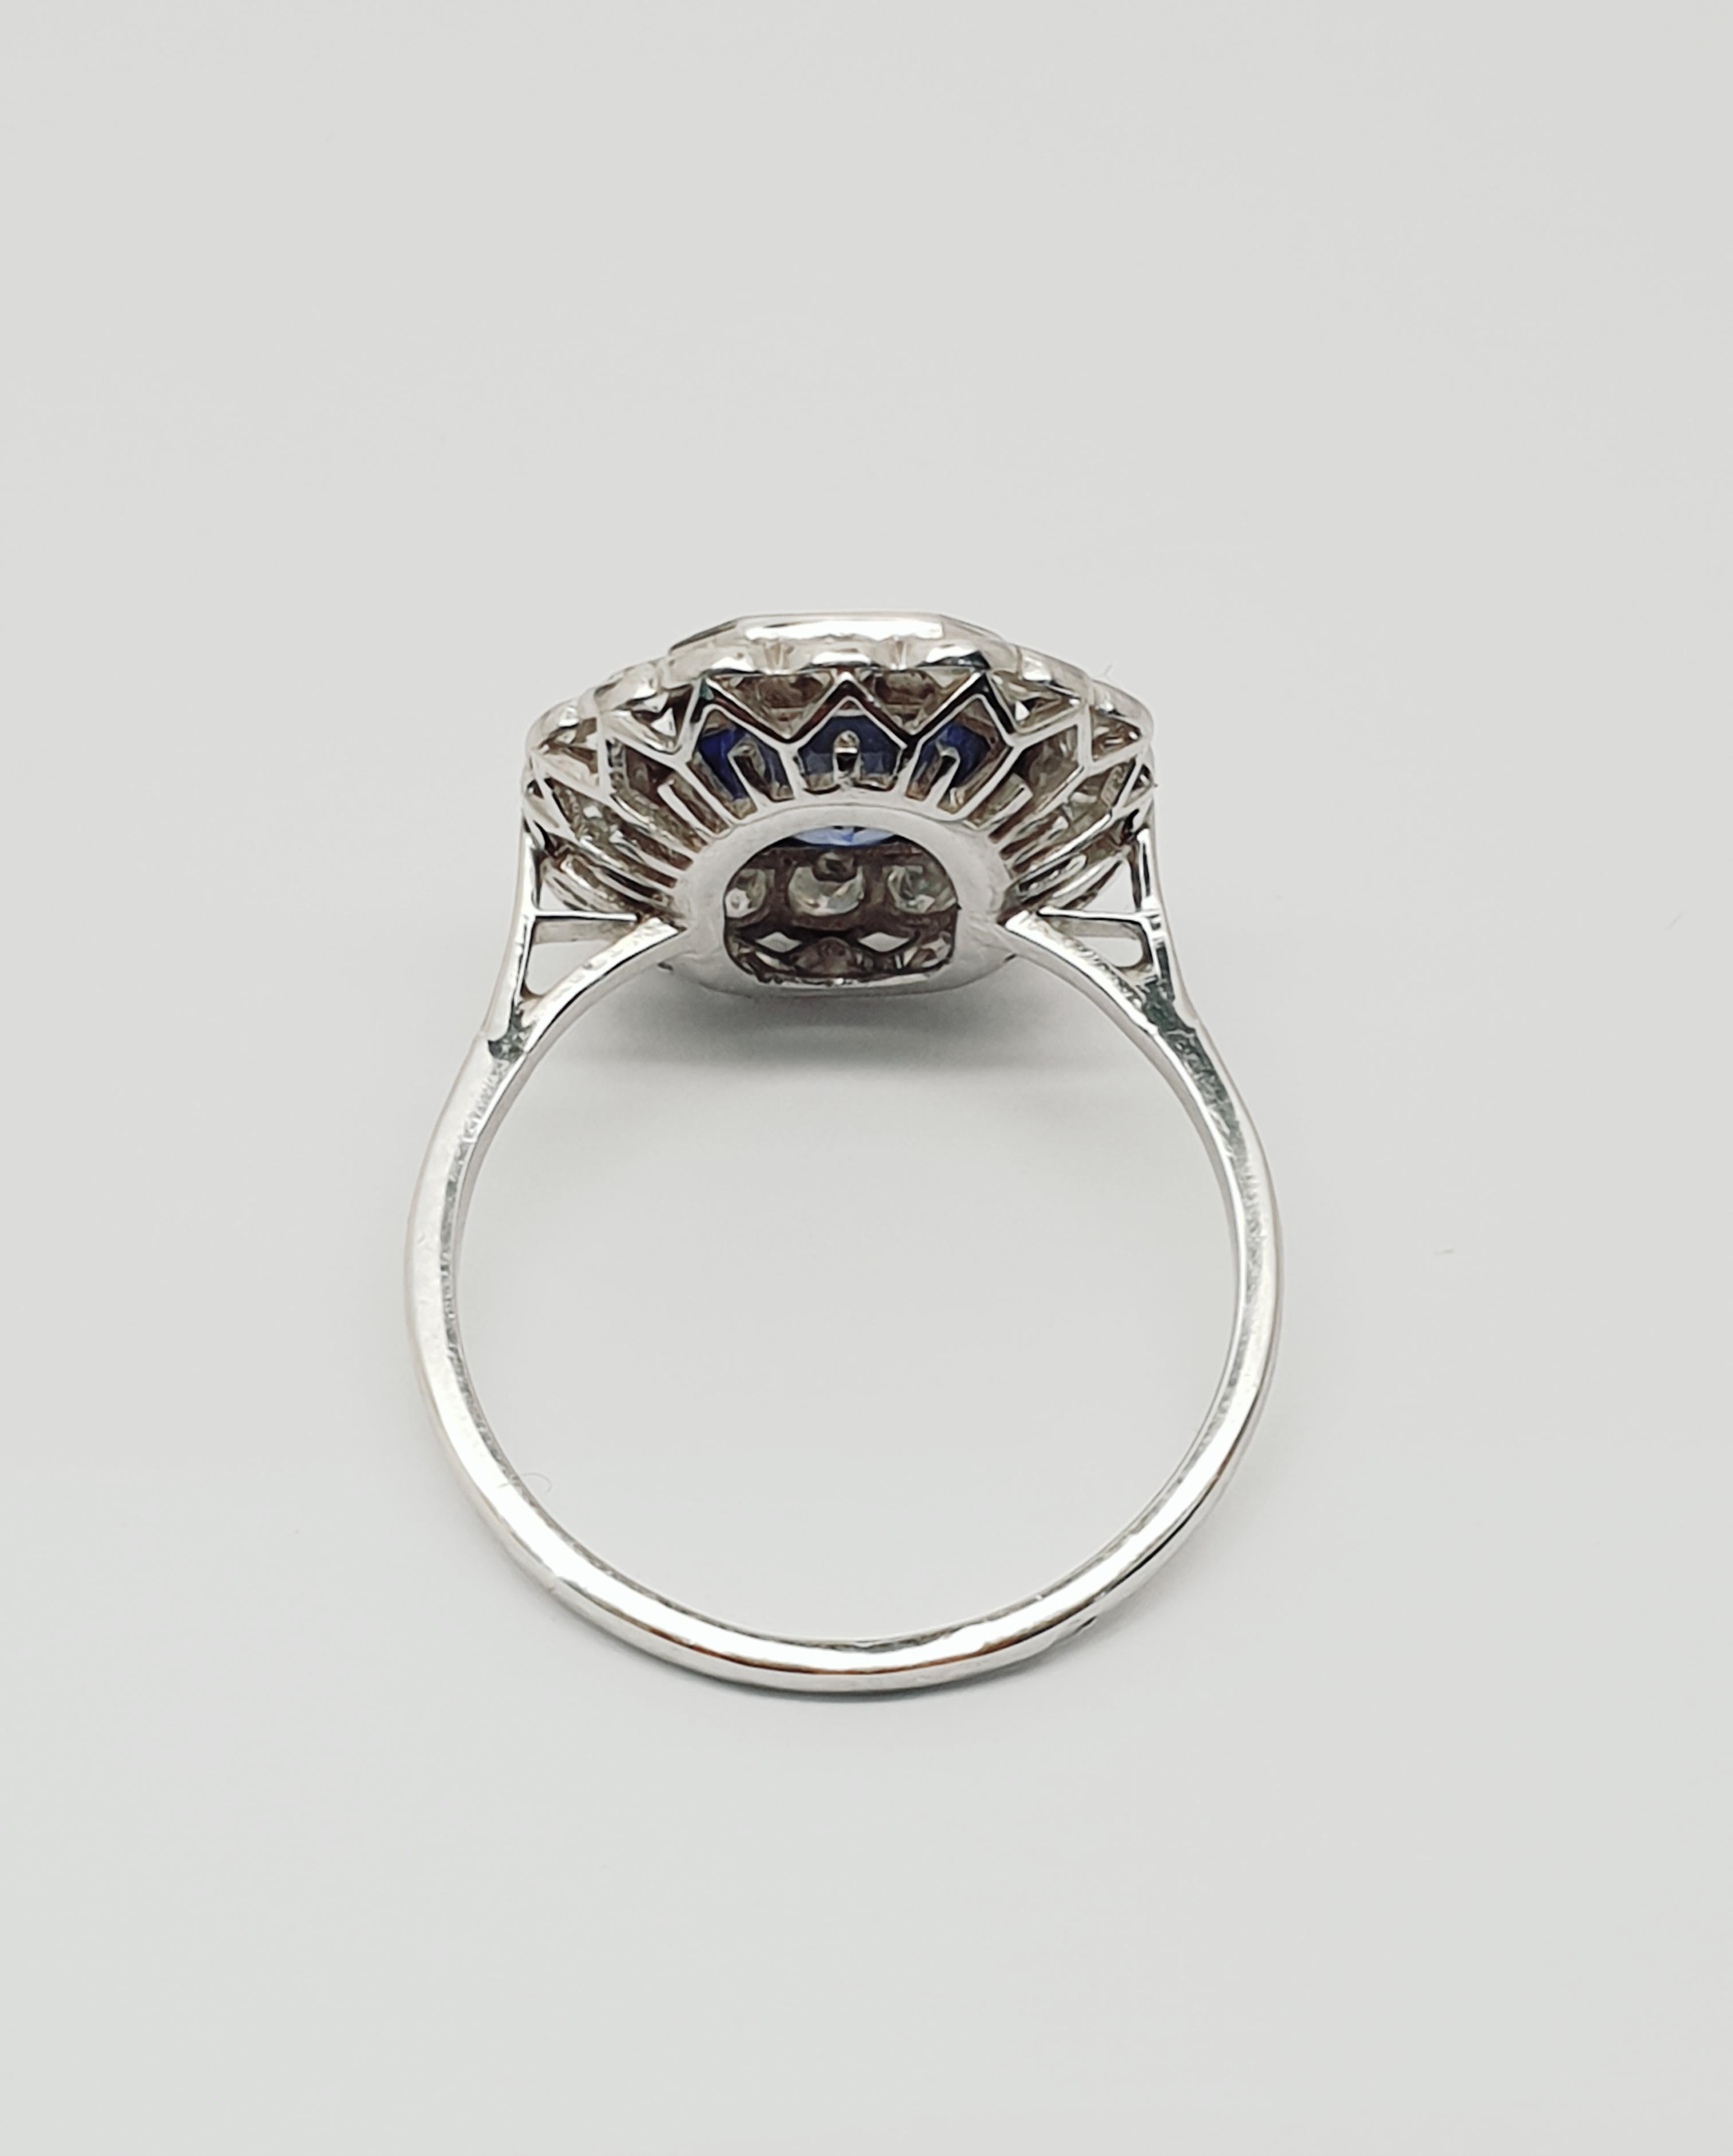 Offering a vintage french origin cluster sapphire diamond ring. The sapphire in the center just over 2 carat weight,heated Ceylon sapphire.
18 0.03 carat diamonds are set in the cluster. Total weight:0.54 carat. The ring is 18 carat white gold. Size